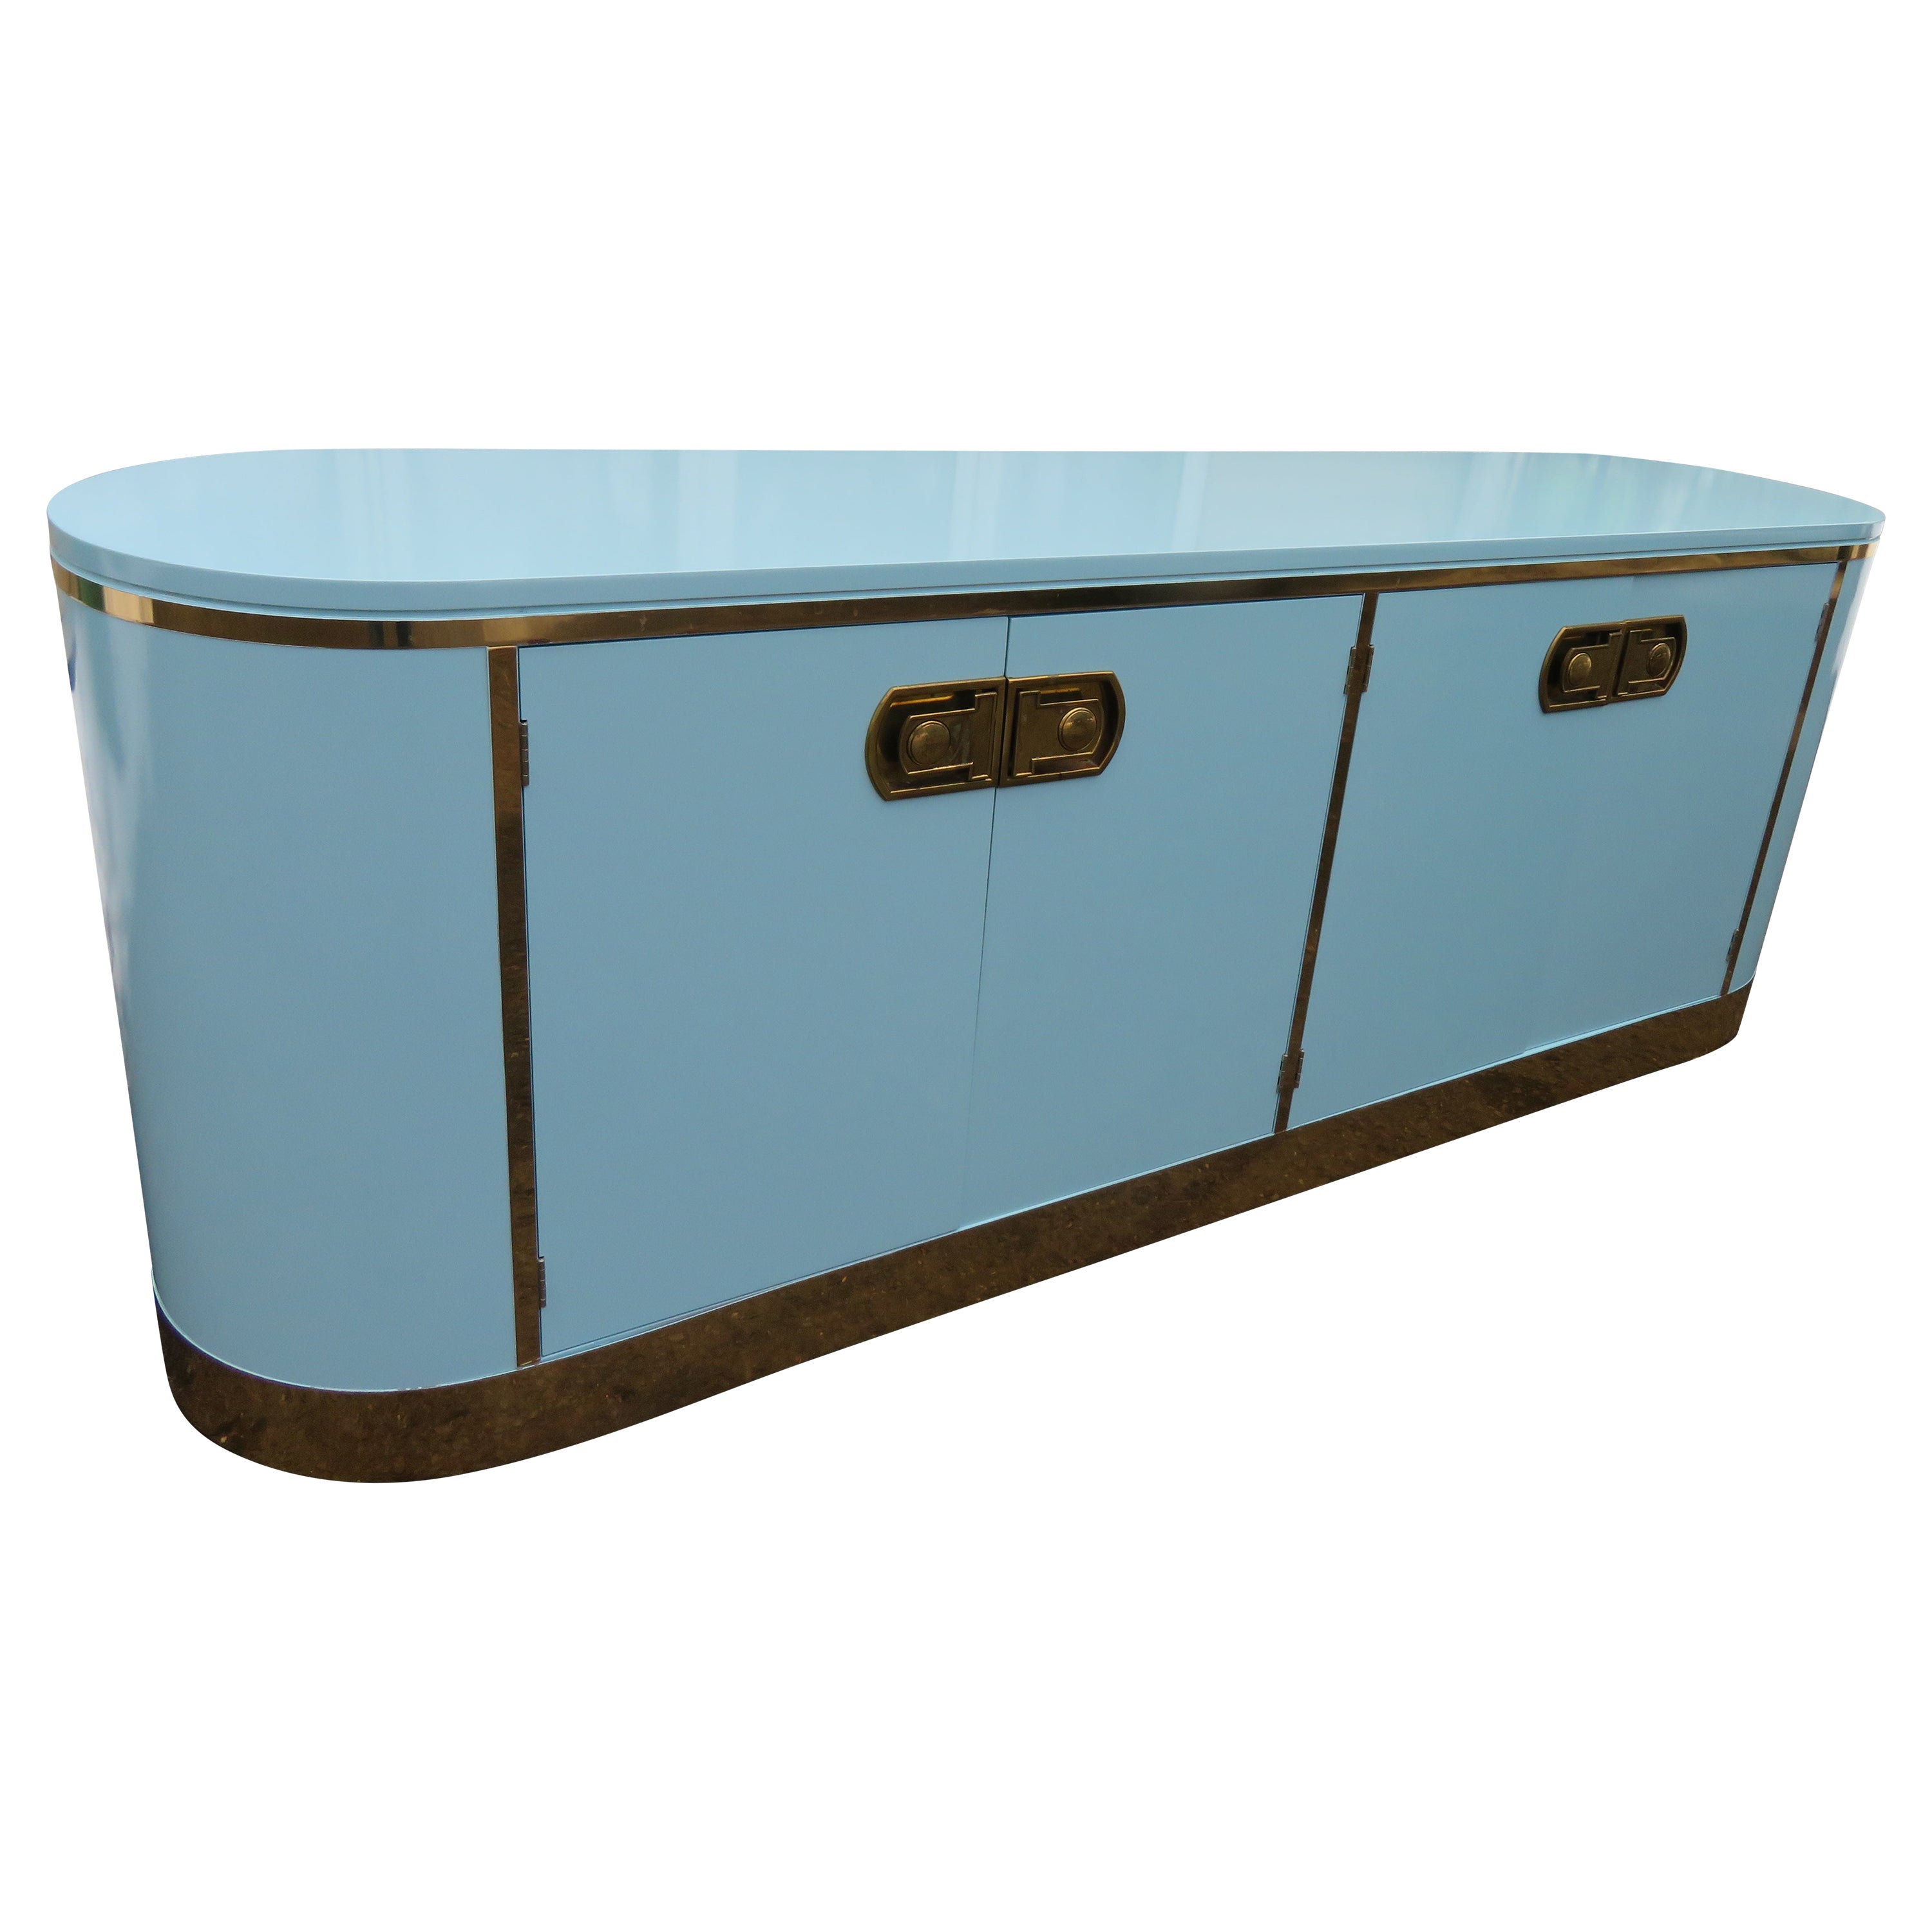 Marvelous Tiffany Blue Mastercraft Pill Shaped Credenza Mid-Century Modern For Sale